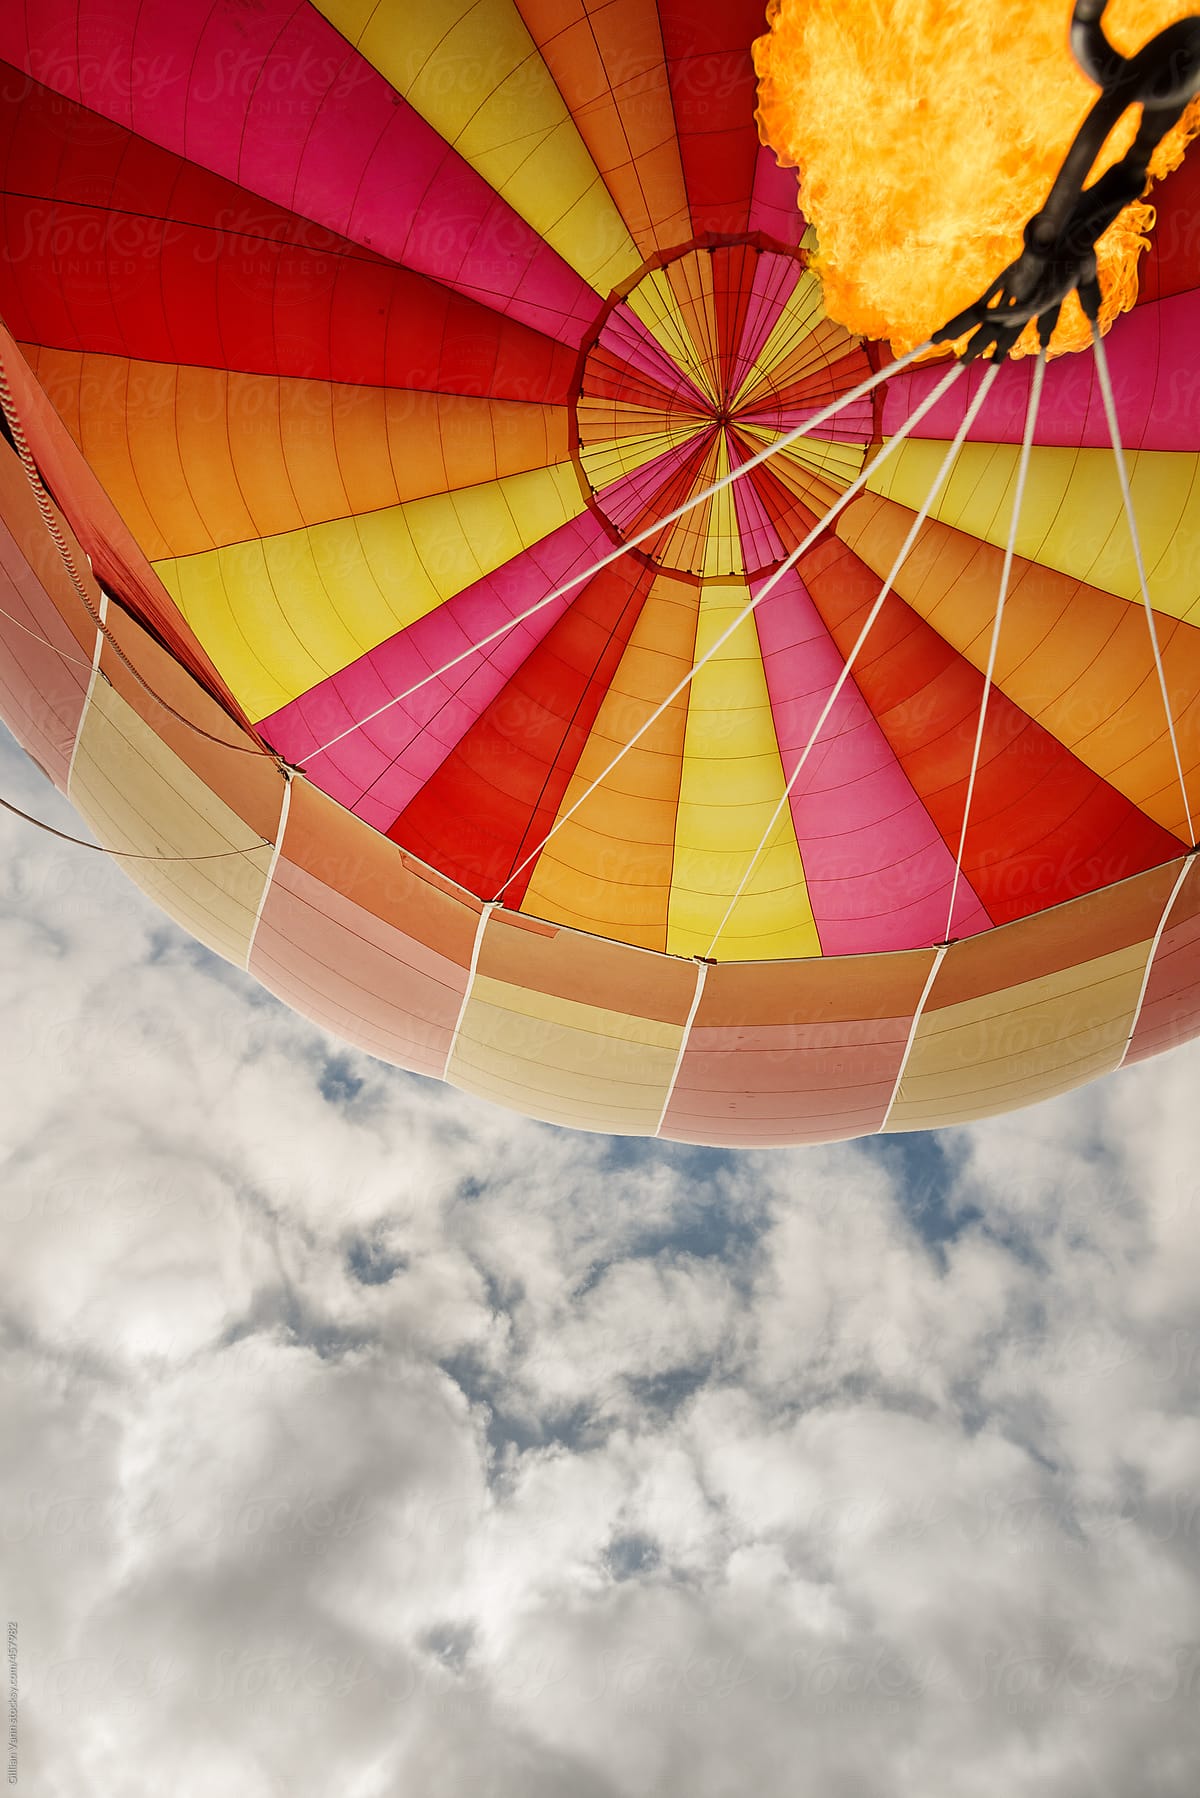 looking up into a hot air balloon canopy with a flame burst